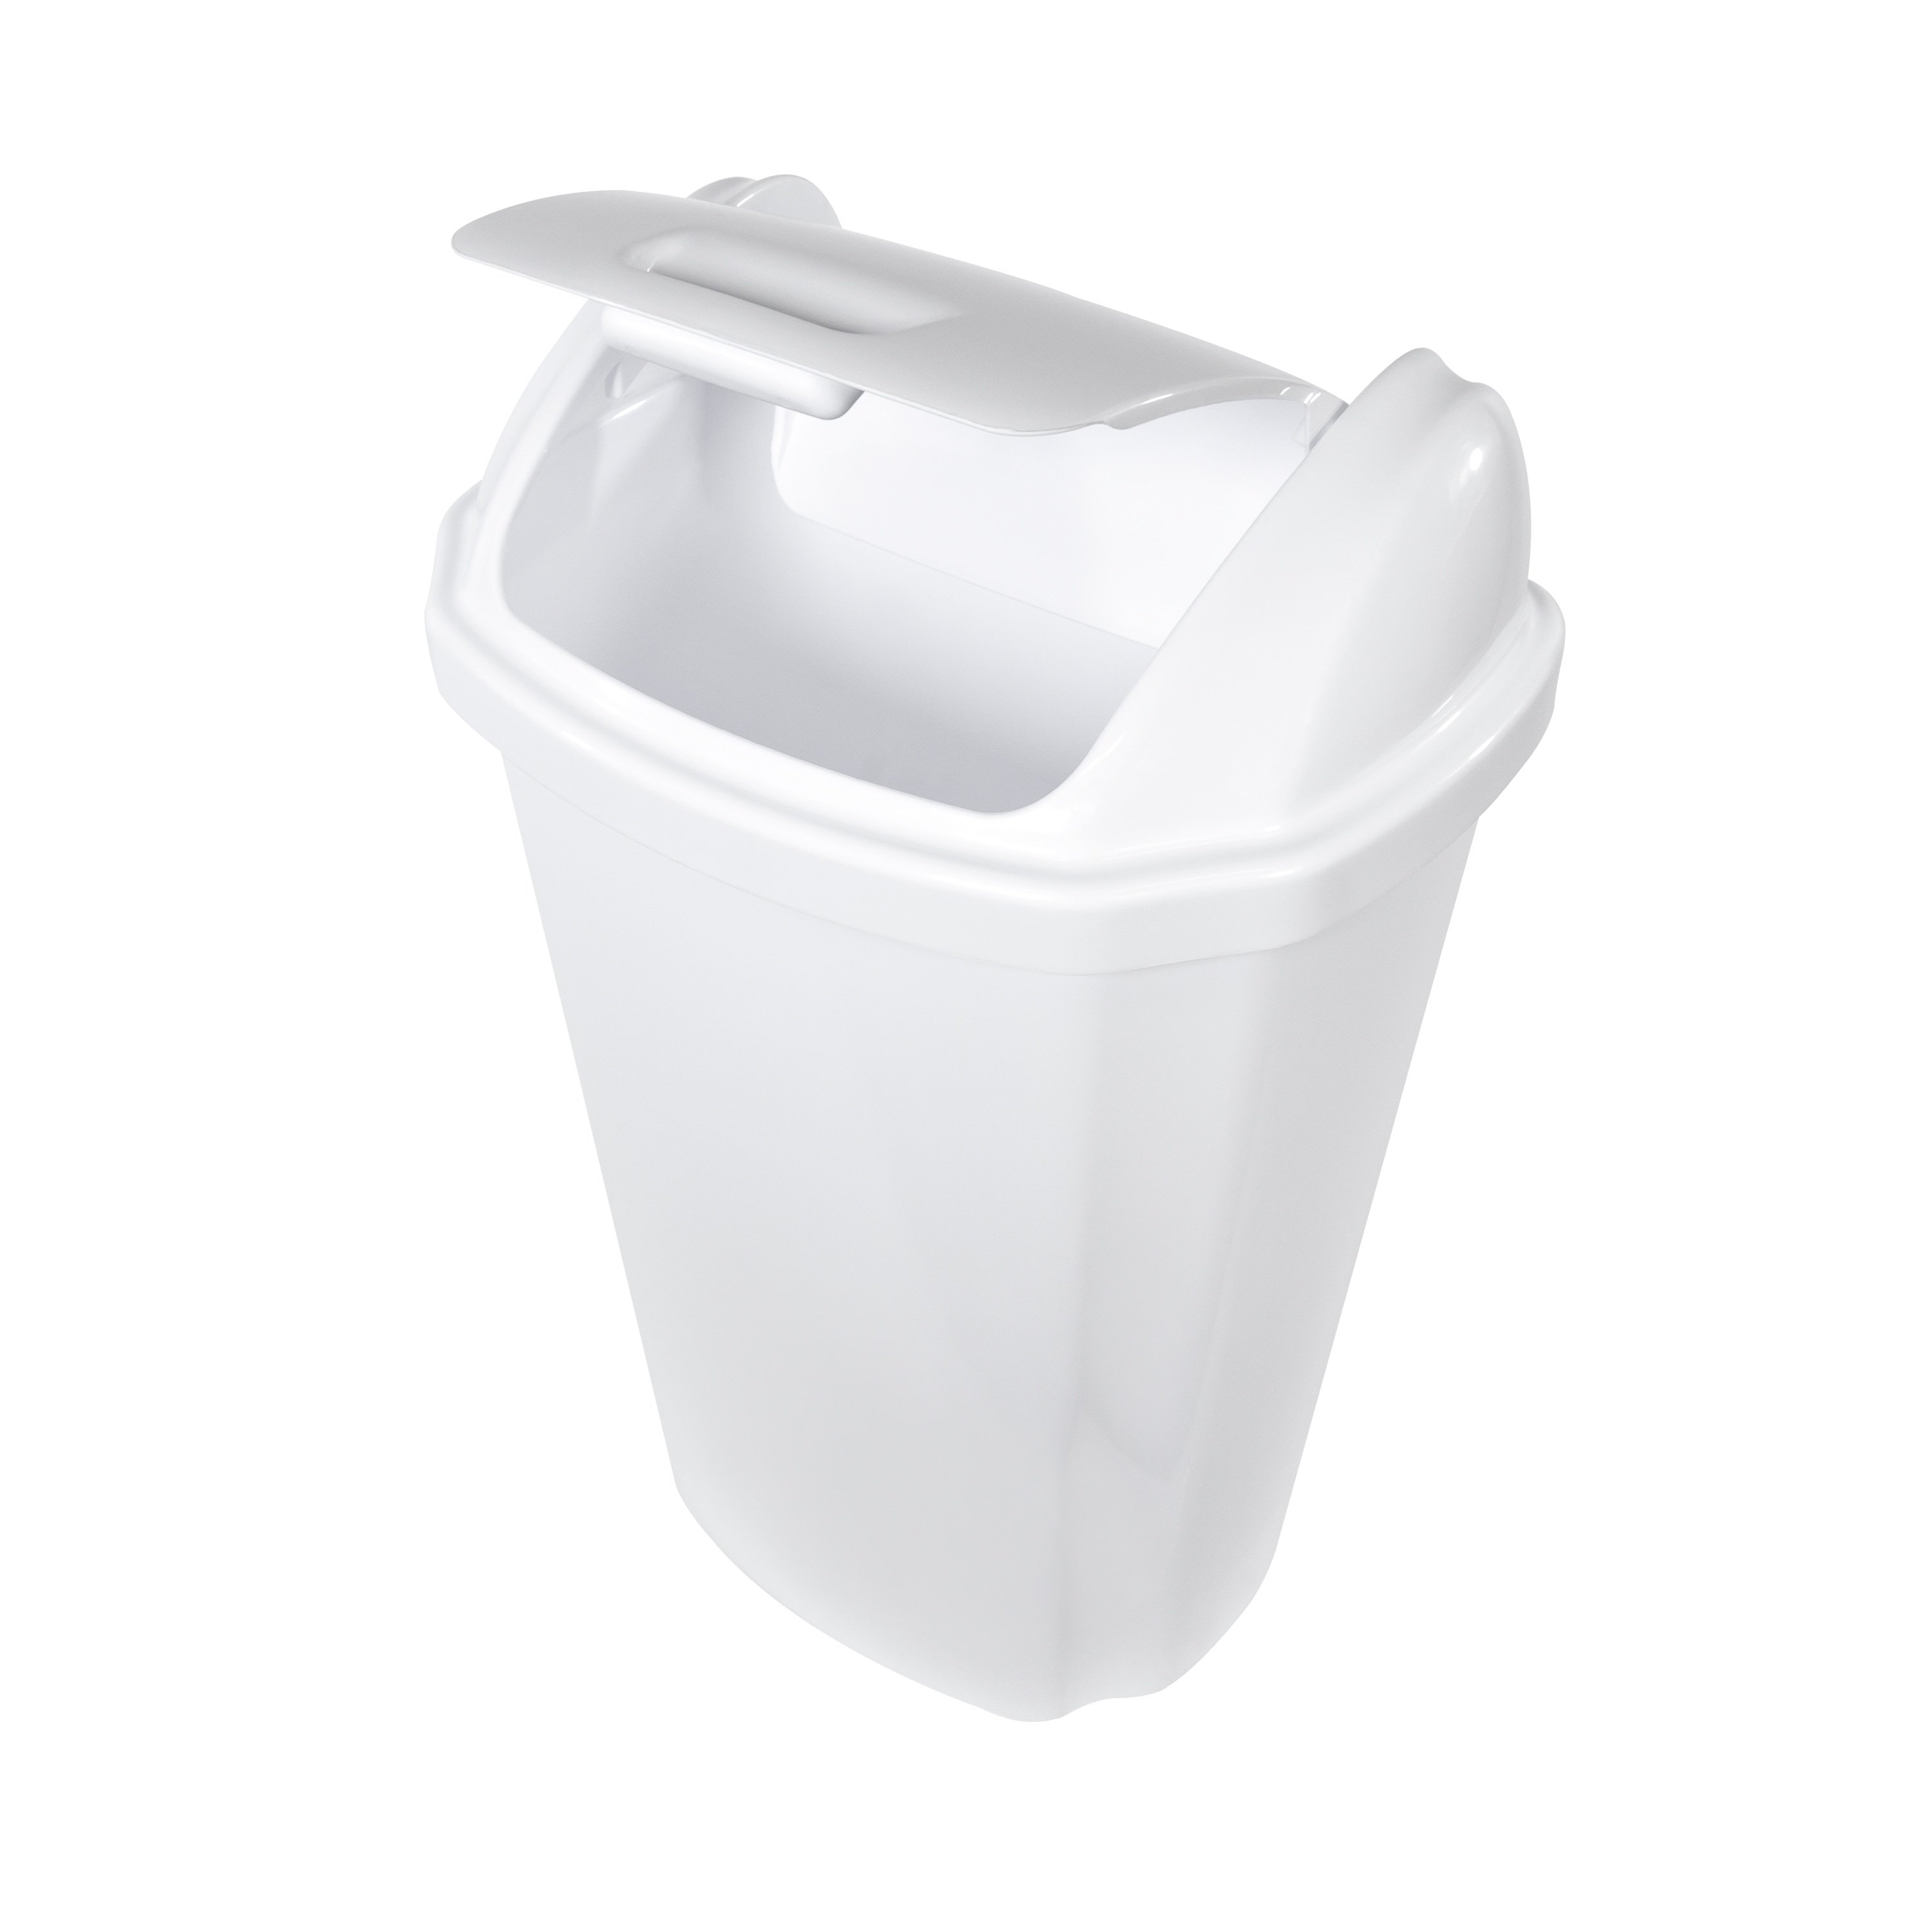 Hefty 13-Gallons White Plastic Kitchen Trash Can with Lid Indoor